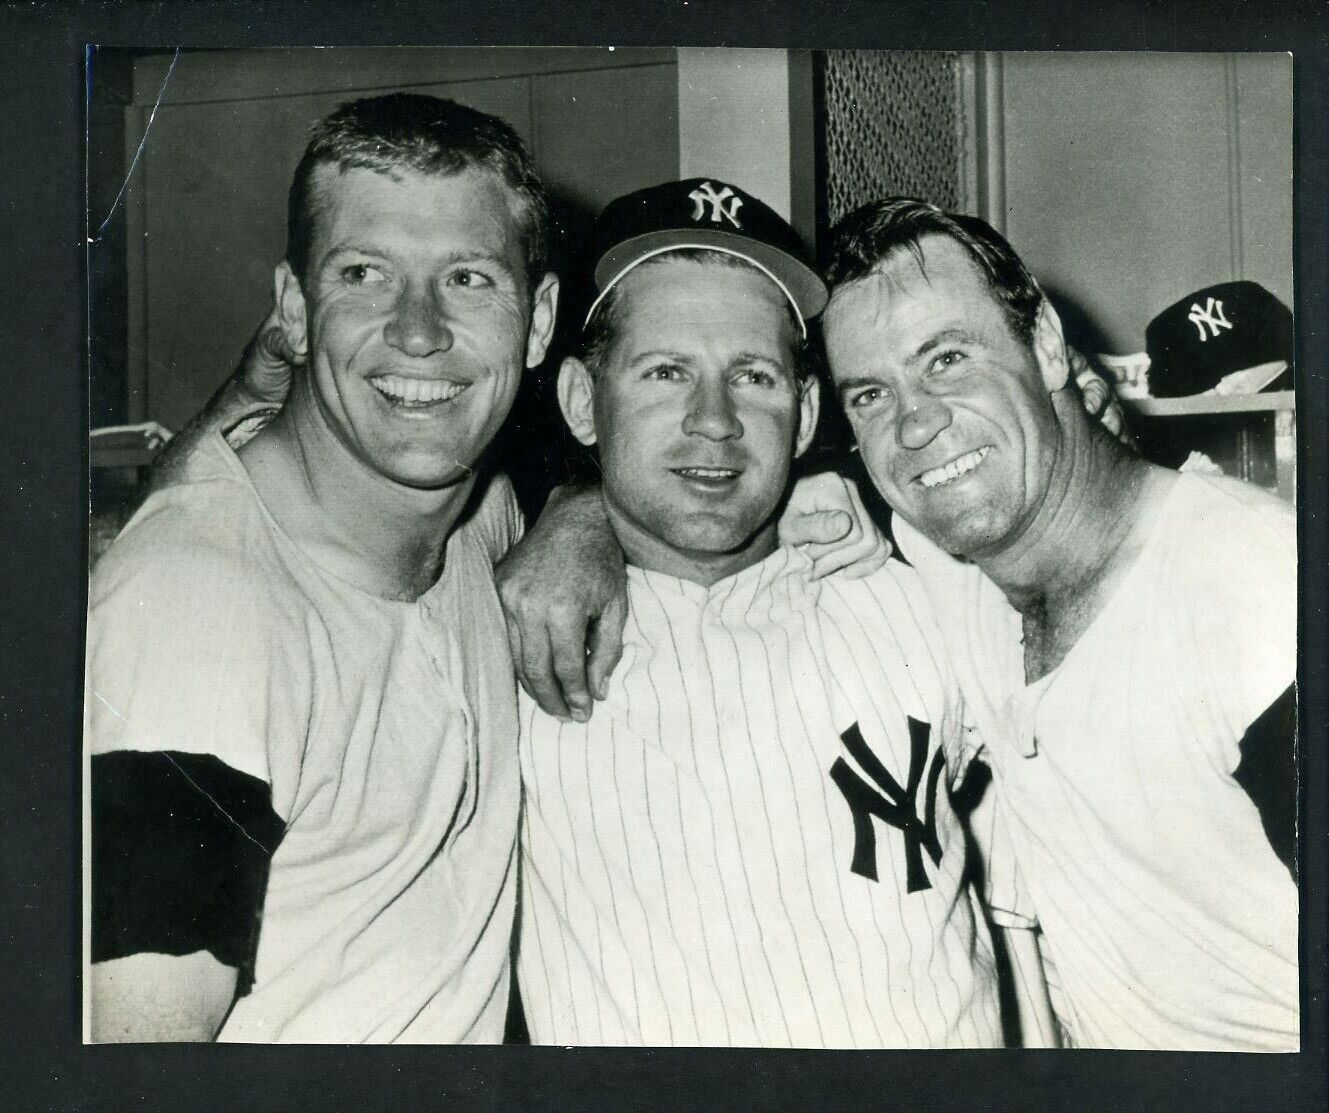 Mickey Mantle Whitey Ford Hank Bauer c. 1950's Press Photo Poster painting New York Yankees